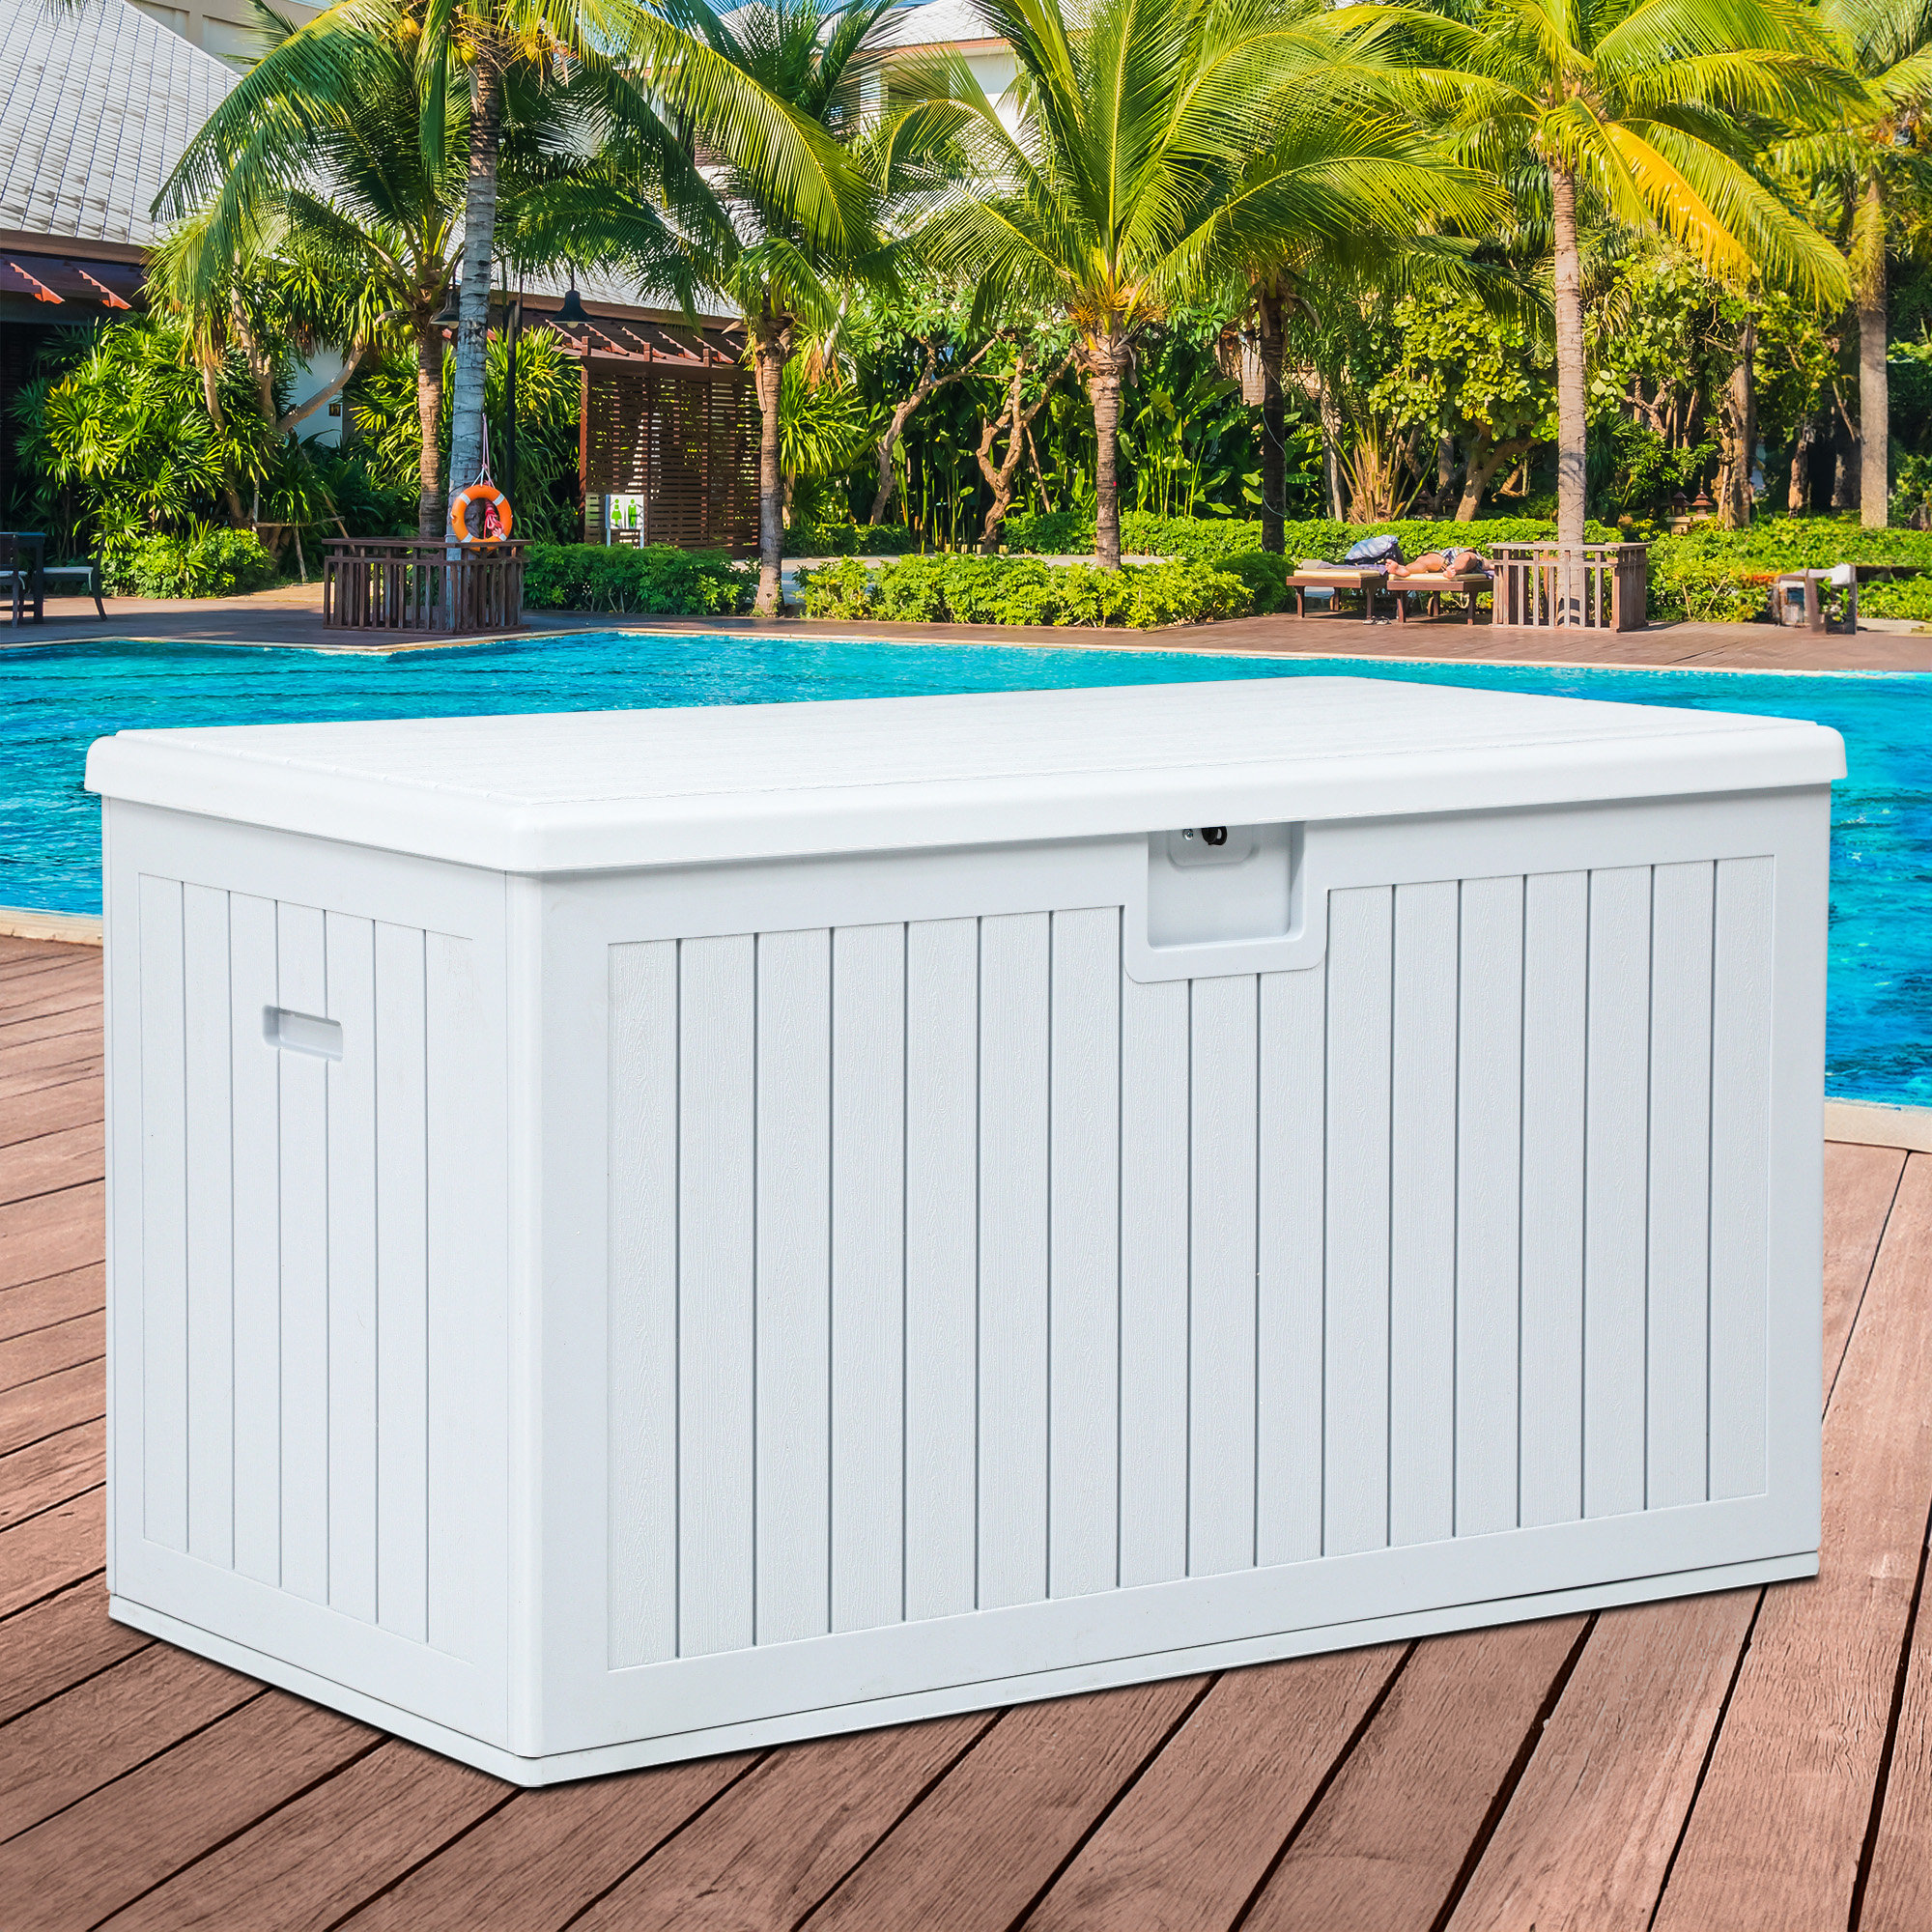 YITAHOME Yita 150 Gallon Water Resistant Resin Lockable Deck Box with Flexible Divider Color: Off-White FWDB0008343YIH